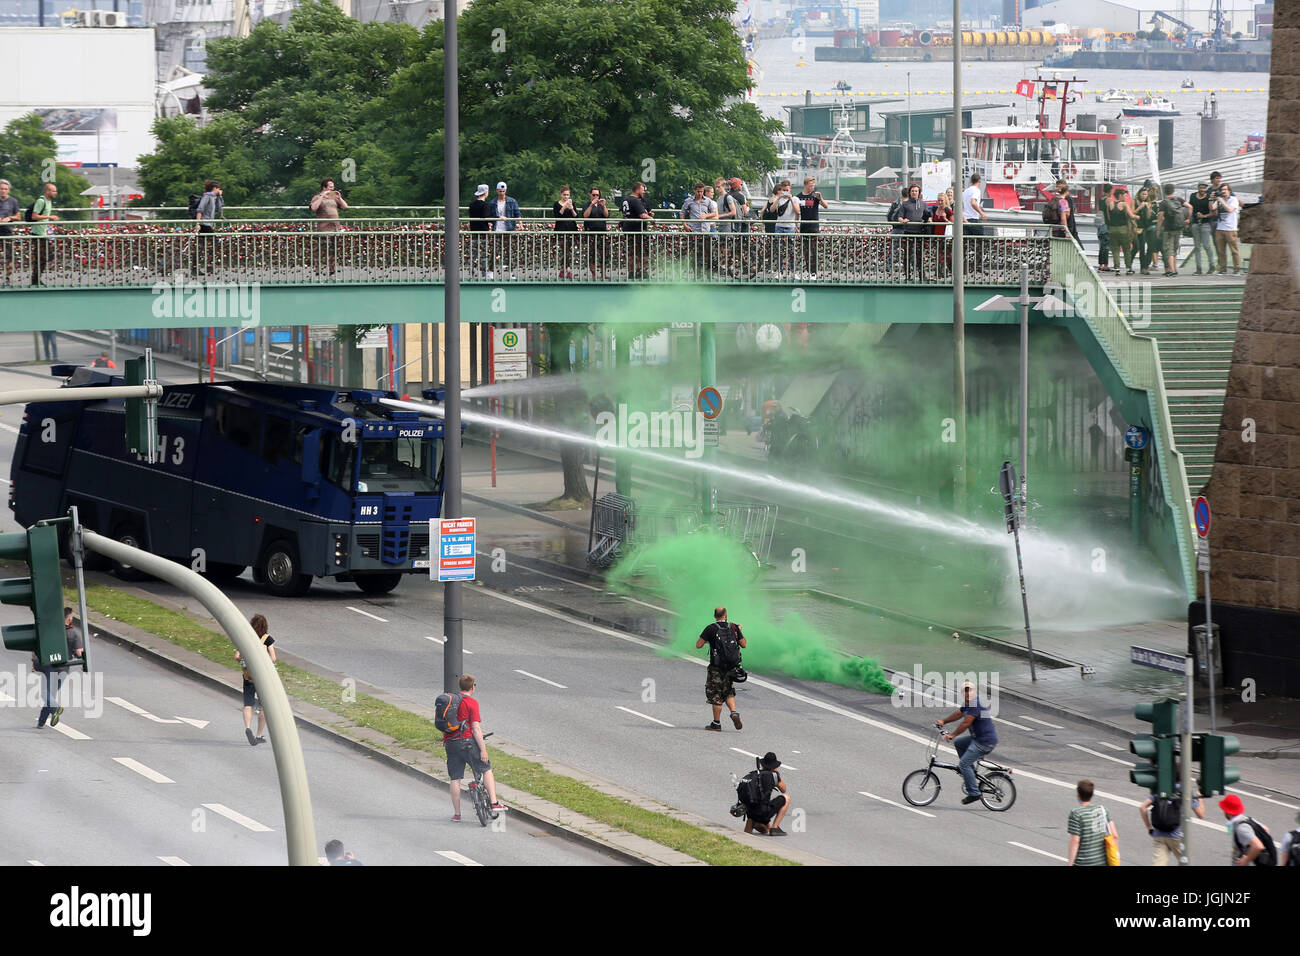 Hamburg, Germany. 7th July, 2017. Policemen use a water canon near Landungsbruecken station in Hamburg, Germany, 7 July 2017. The heads of the governments of the G20 group of countries are meeting in Hamburg on the 7-8 July 2017. Photo: Sebastian Willnow/dpa/Alamy Live News Stock Photo